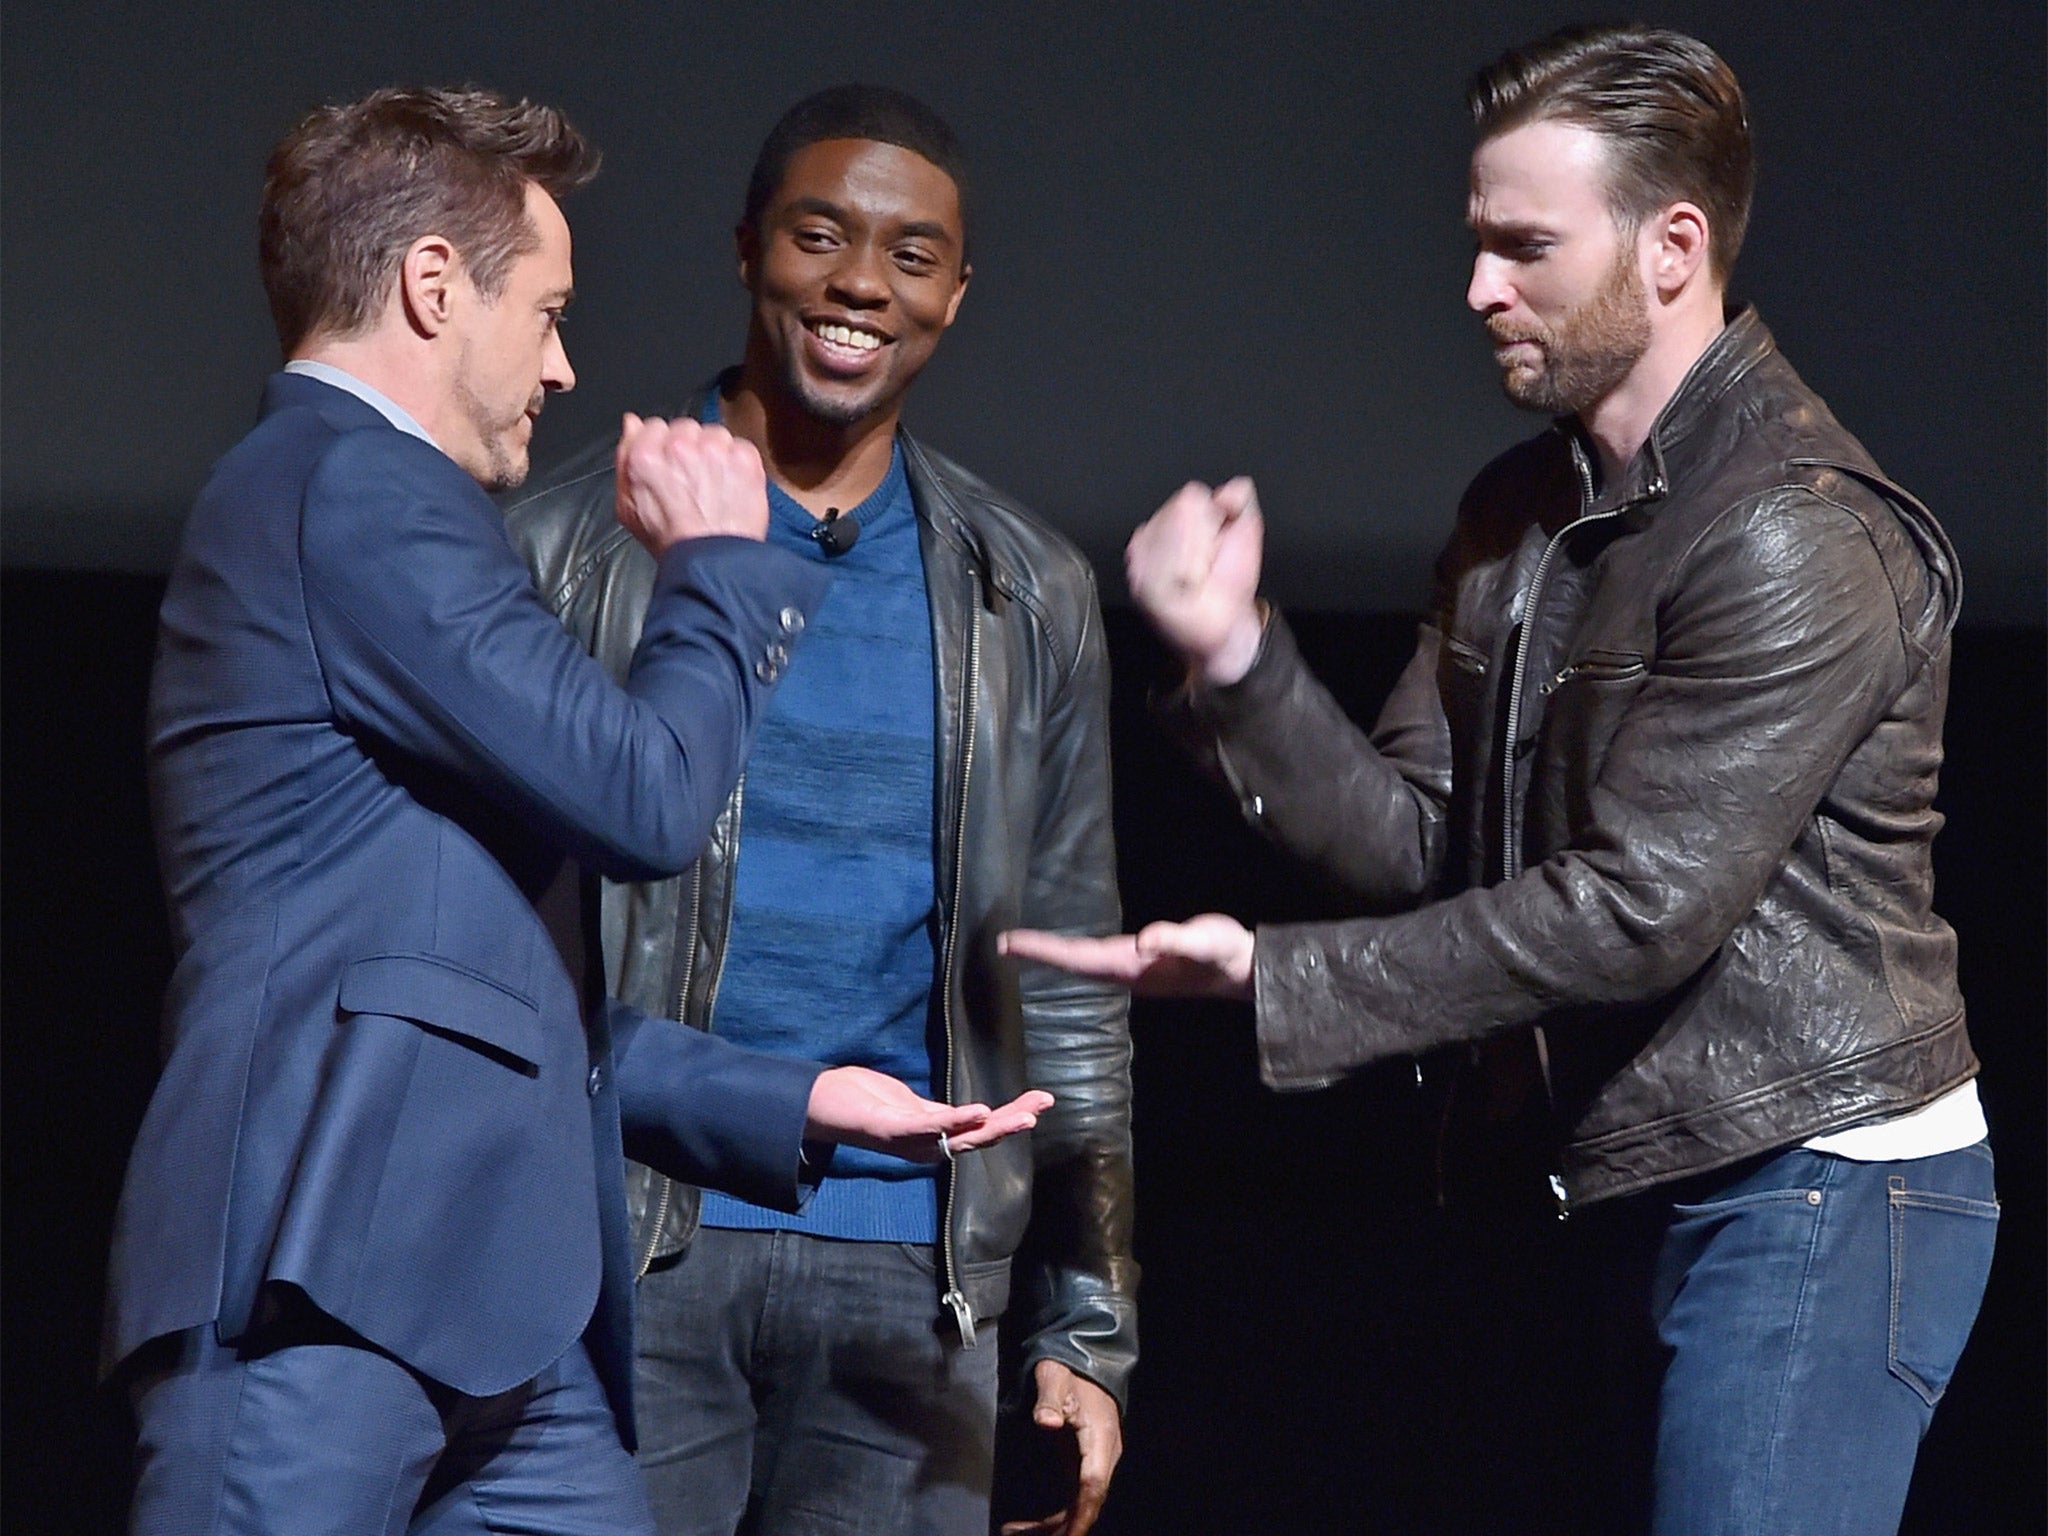 Black Panther (Boseman) looks on as Ironman (Downey Jr.) and Captain America (Evans) do battle in a game of rock-paper-scissors at a Marvel fan event in Los Angeles